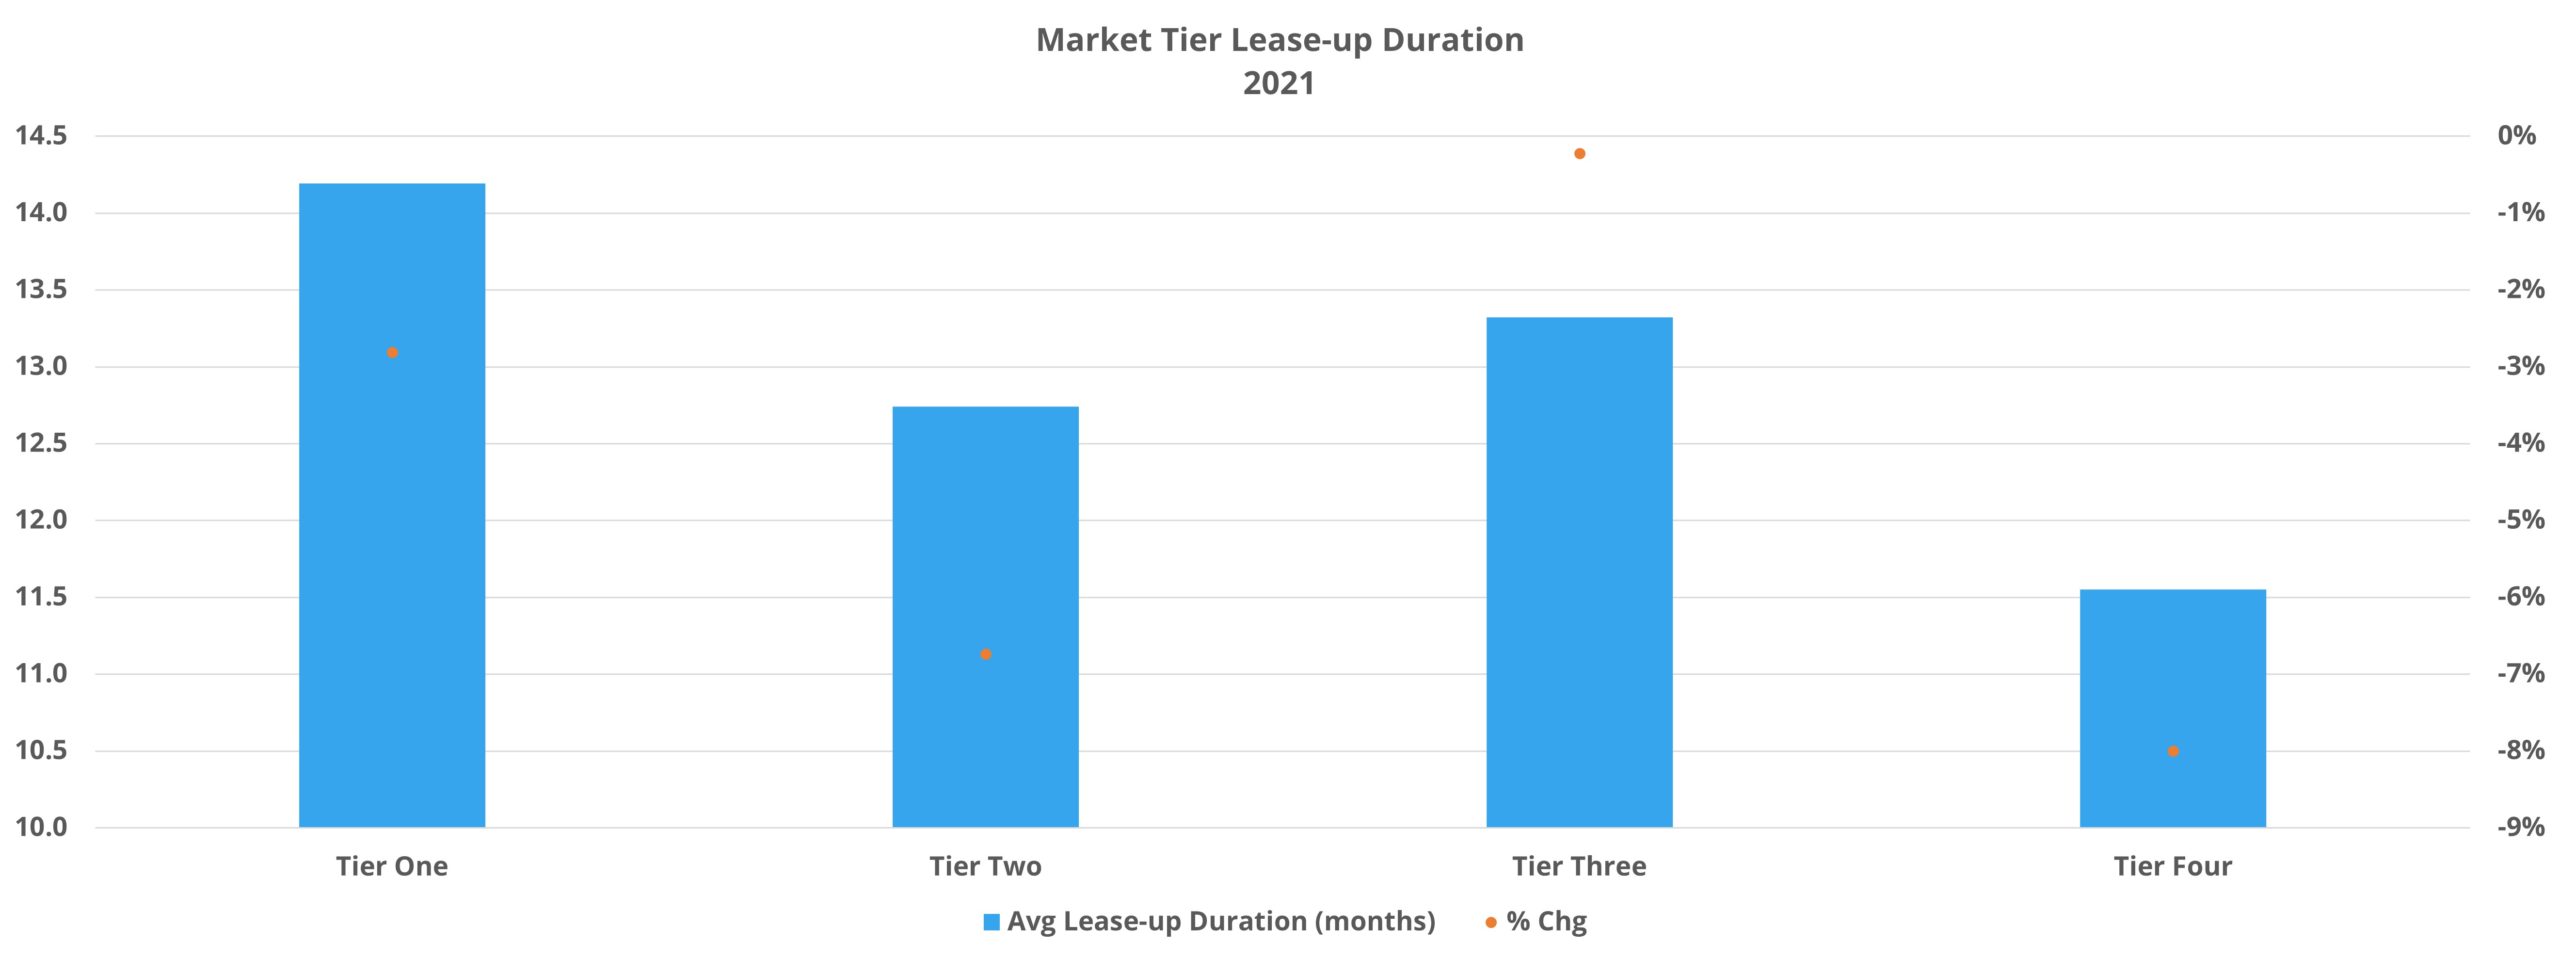 Market Tier Lease-up Duration